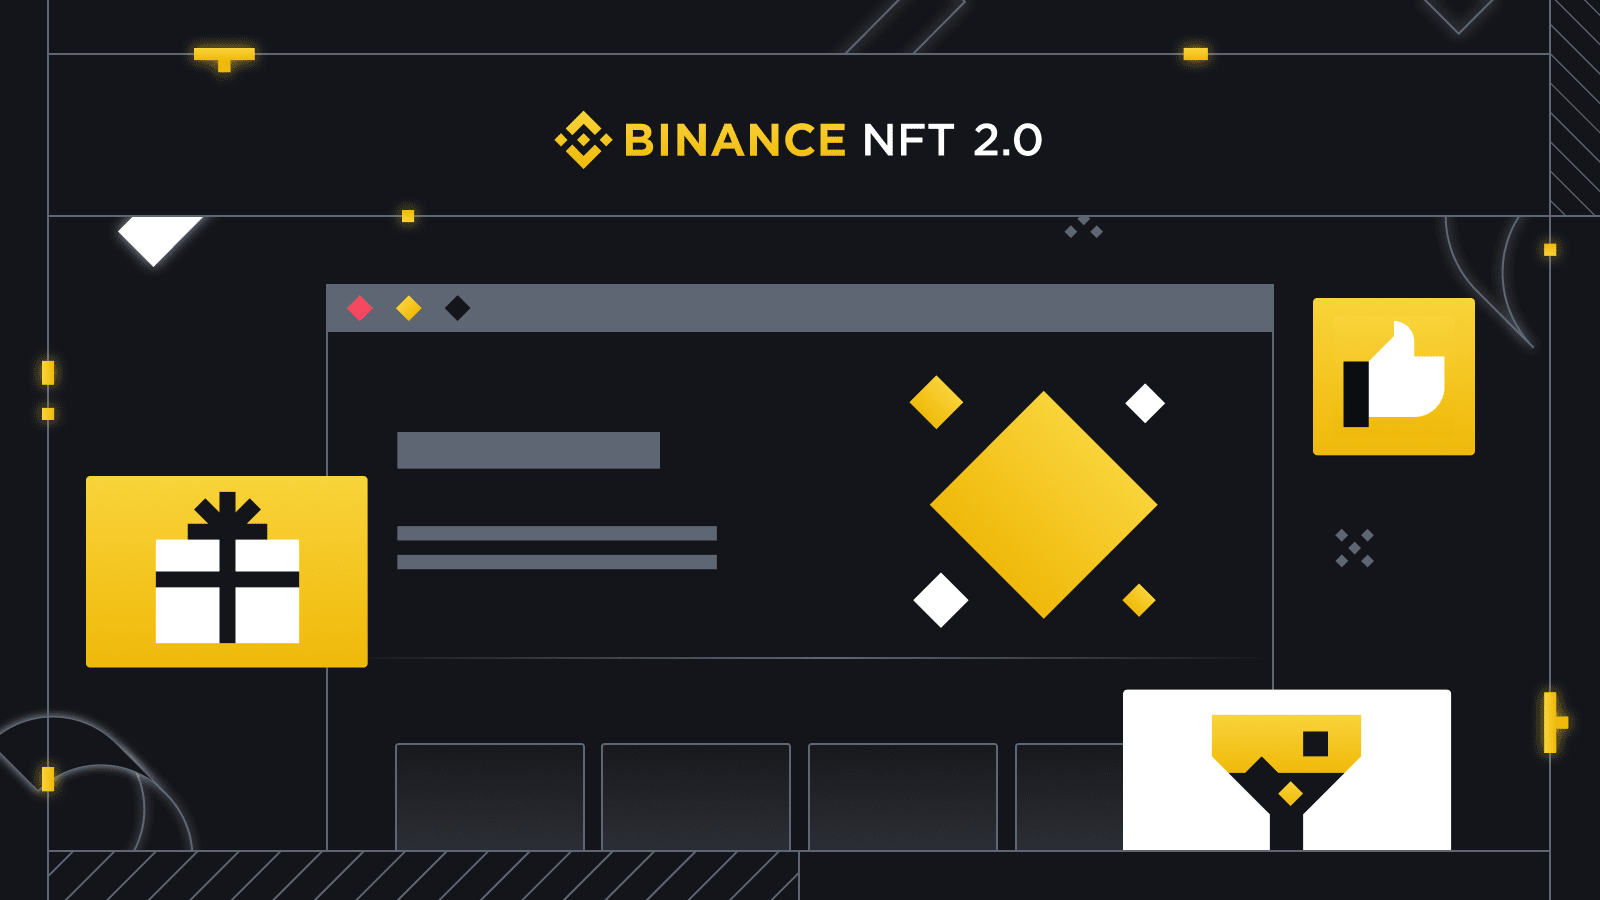 Binance NFT Ceases Support for Bitcoin NFTs